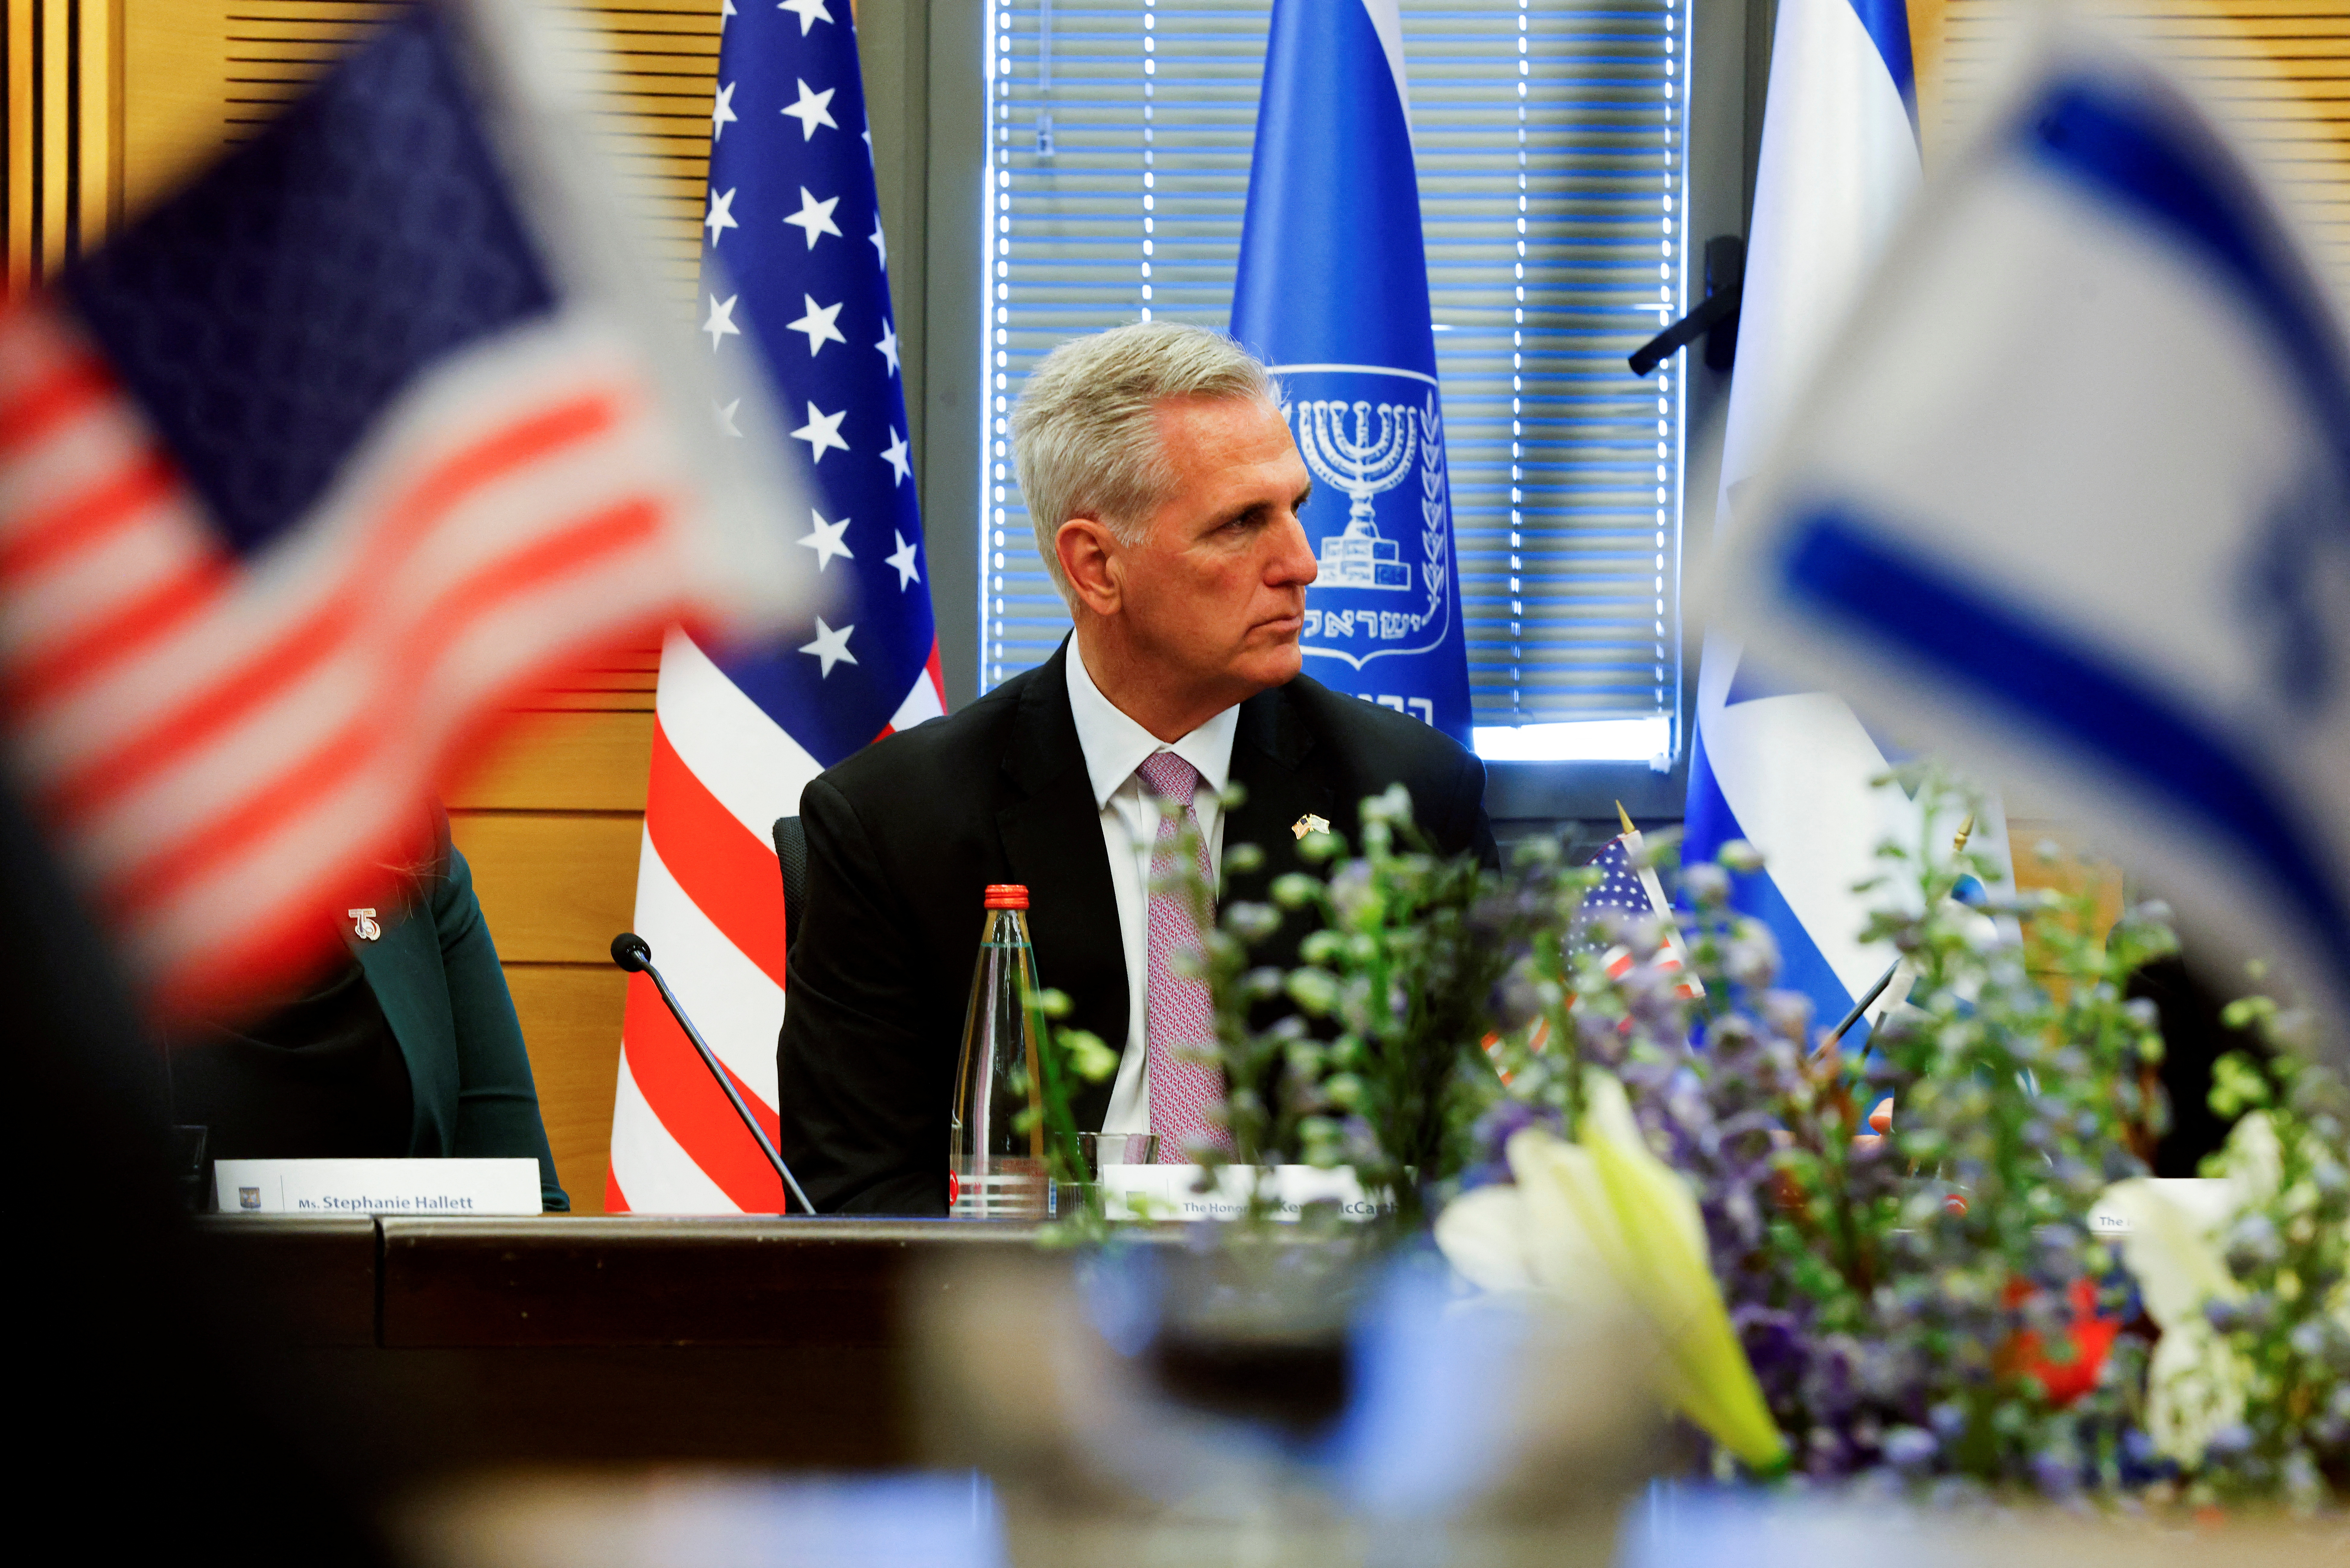 U.S. House Speaker Kevin McCarthy and his Israeli counterpart, Knesset Speaker Amir Ohana hold a bilateral meeting at the Knesset, Israel's Parliament, in Jerusalem